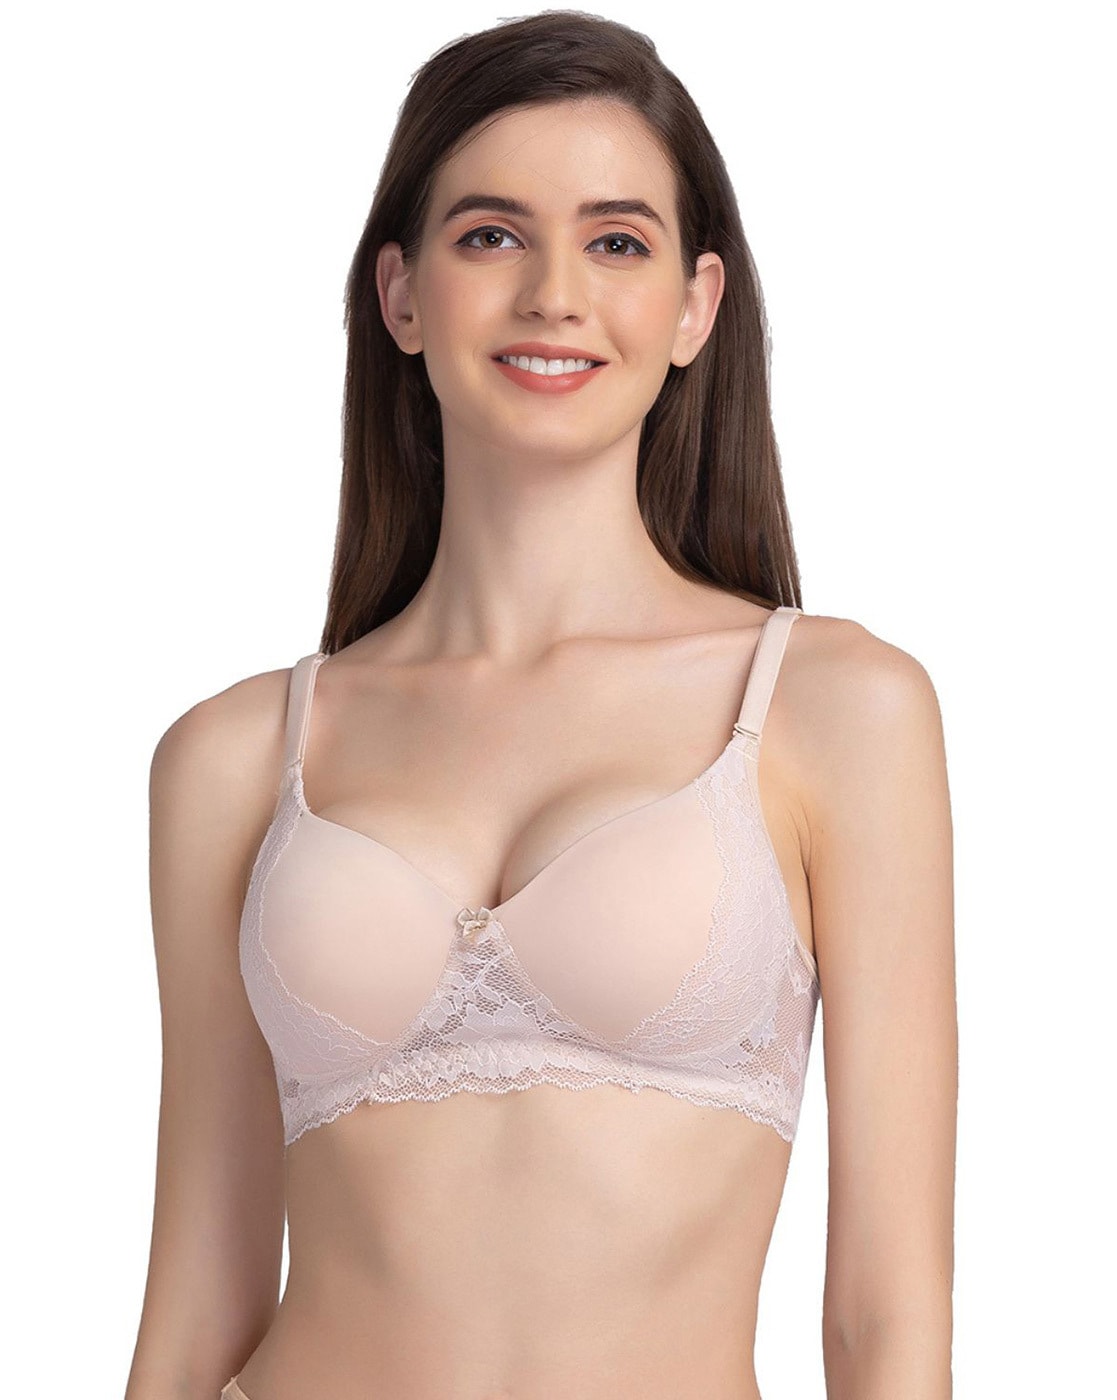 Buy Candyskin Non-Padded Non-Wired Bra - Blue (32B) Online